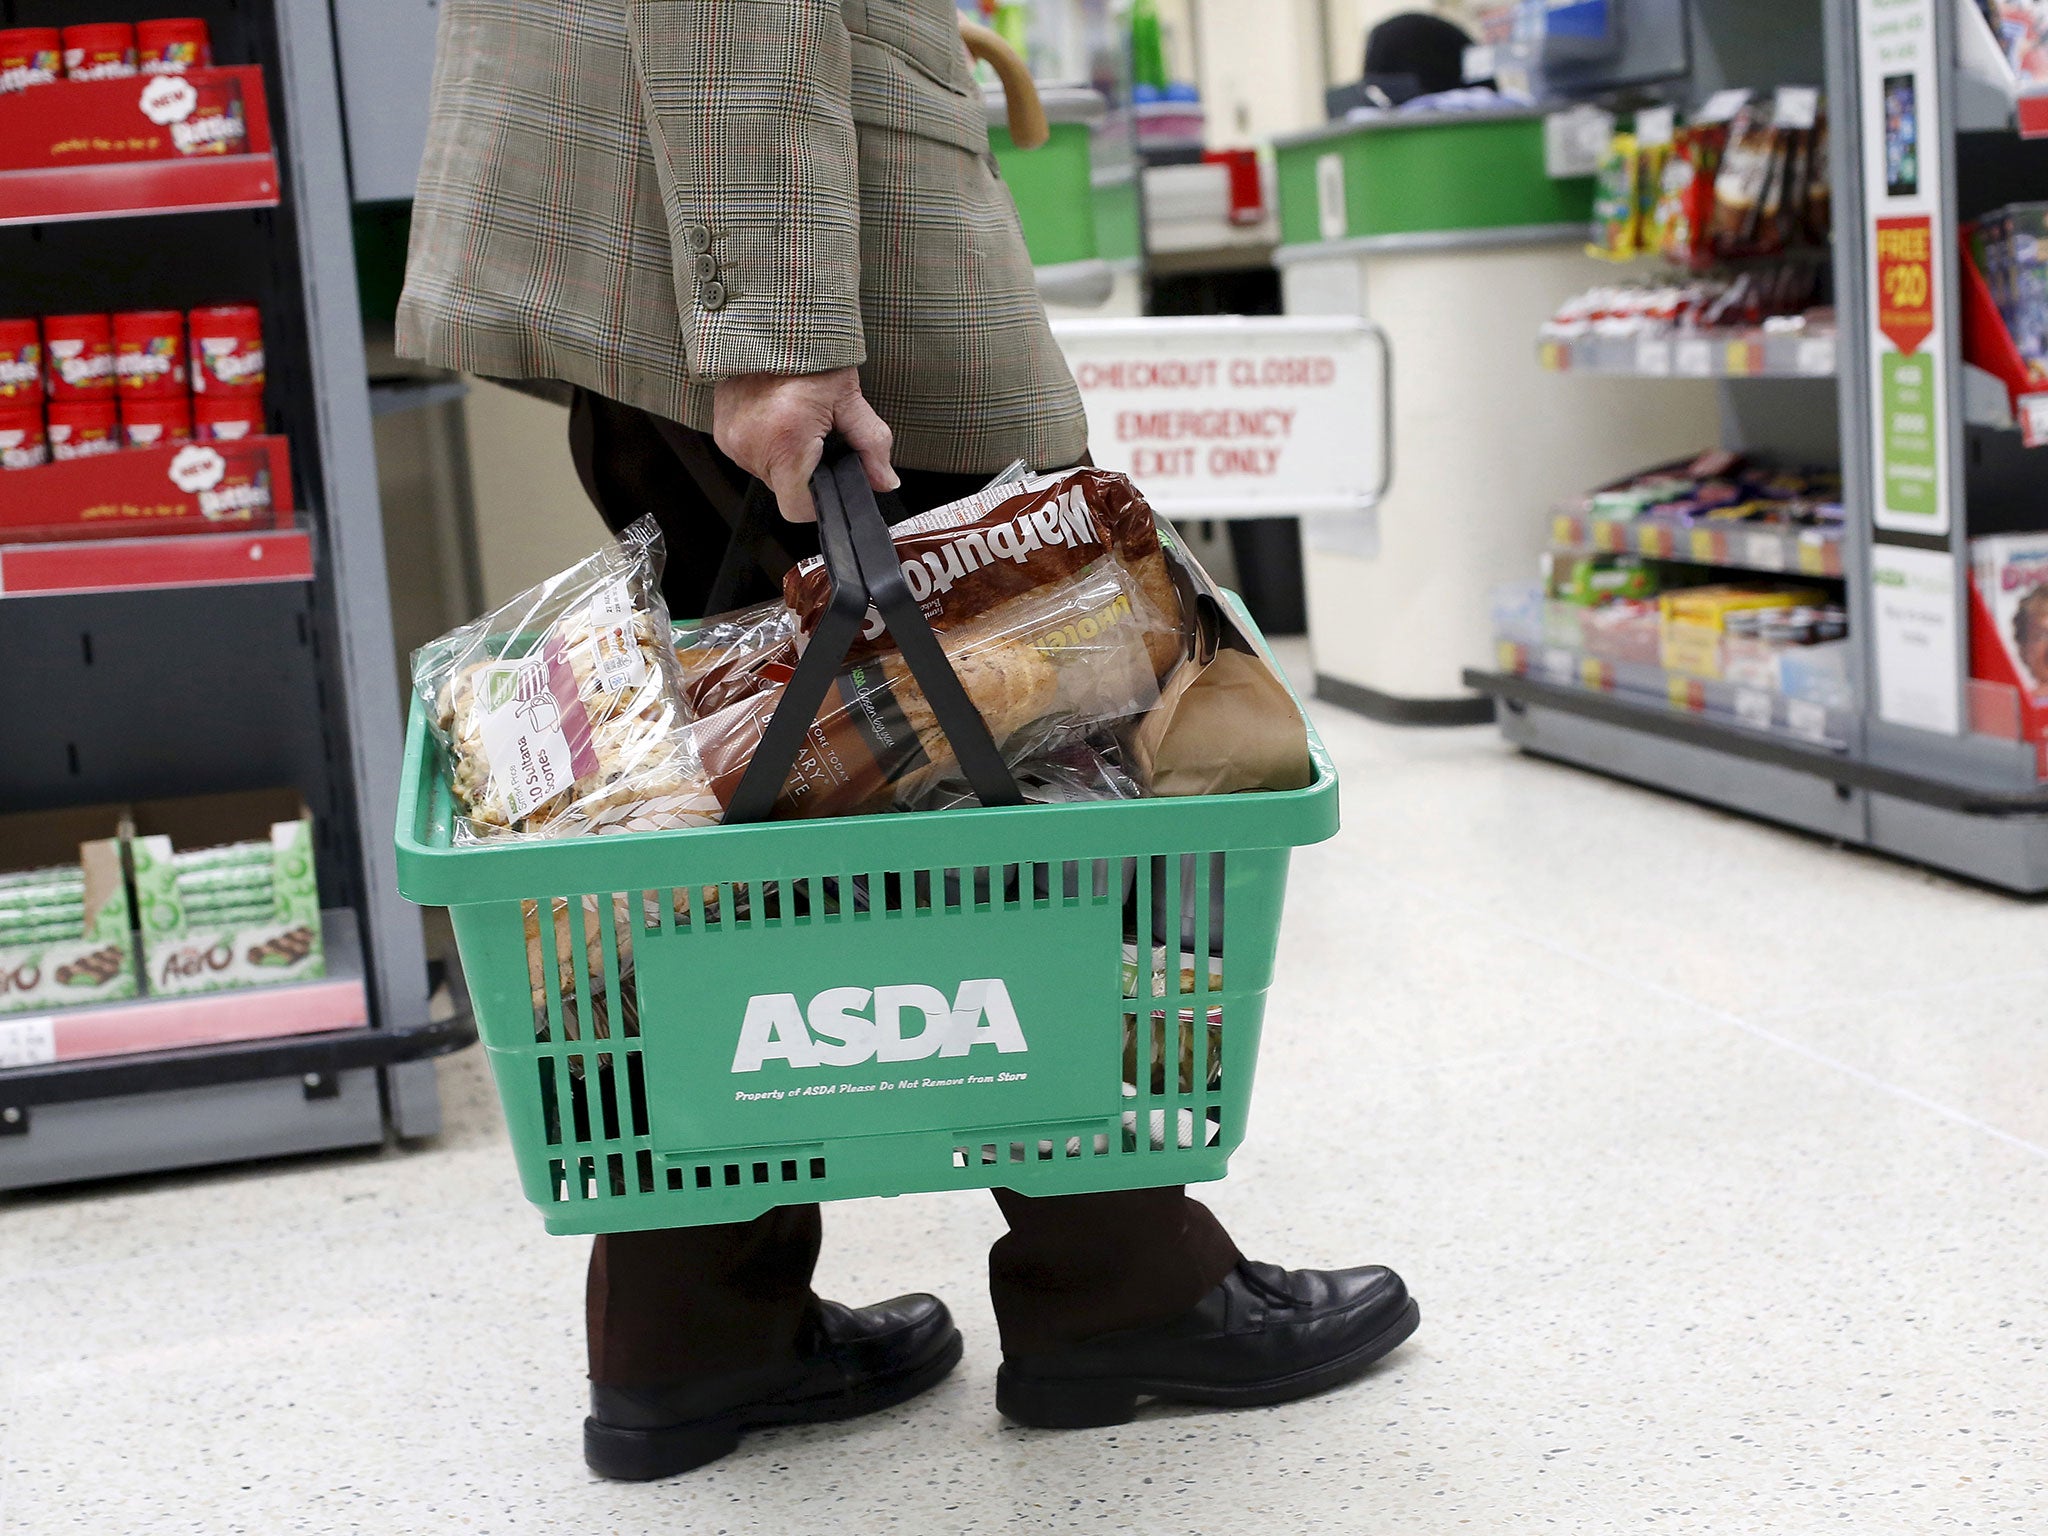 About 200 staff will go out of Asda’s 3,000 workers at its headquarters